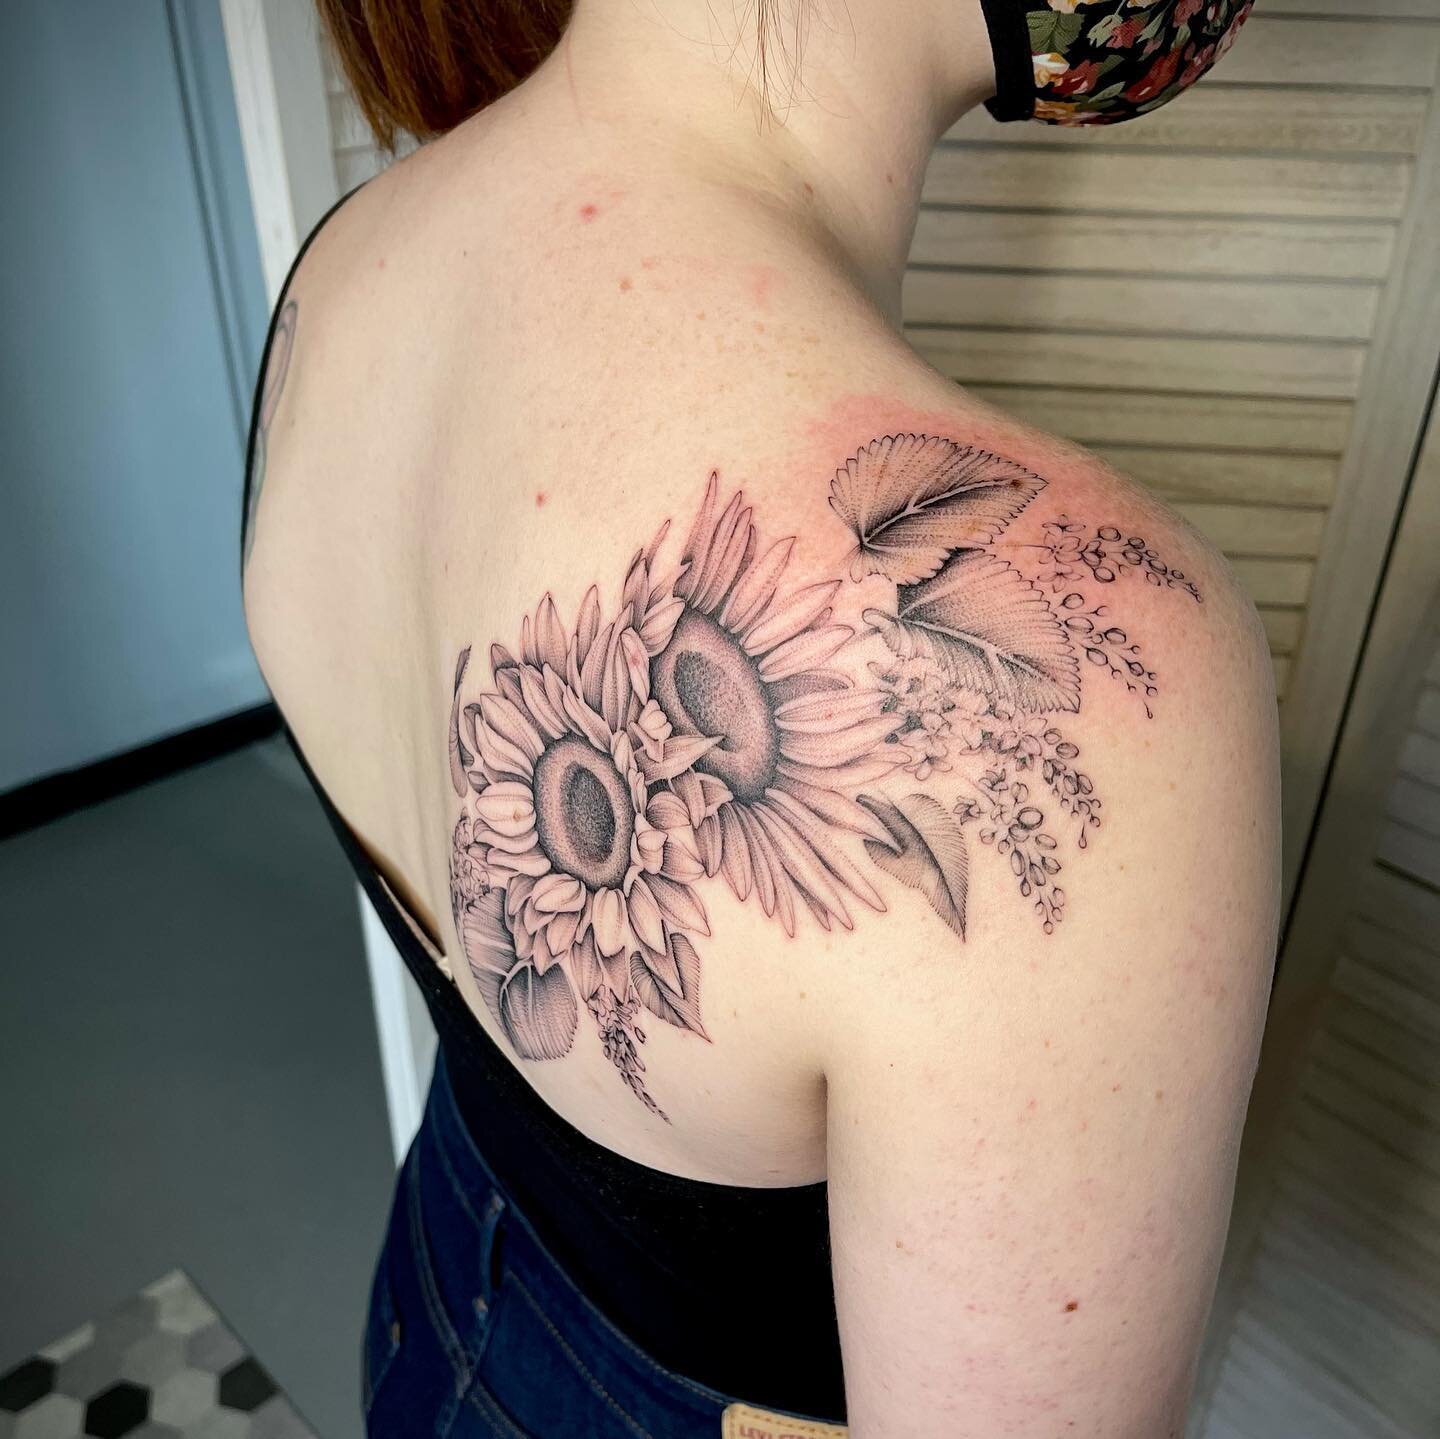 Sunflowers and lilacs &mdash; lovin how this fit her shoulder. 
🌿🌻🌿
&hellip;
&hellip;
&hellip;
&hellip;
&hellip;
&hellip;
#dotworktattoo #finelinetattoo #bngtattoo #blackandgreytattoo #sunflower #sunflowertattoo #floraltattoo #lilactattoo #shoulde